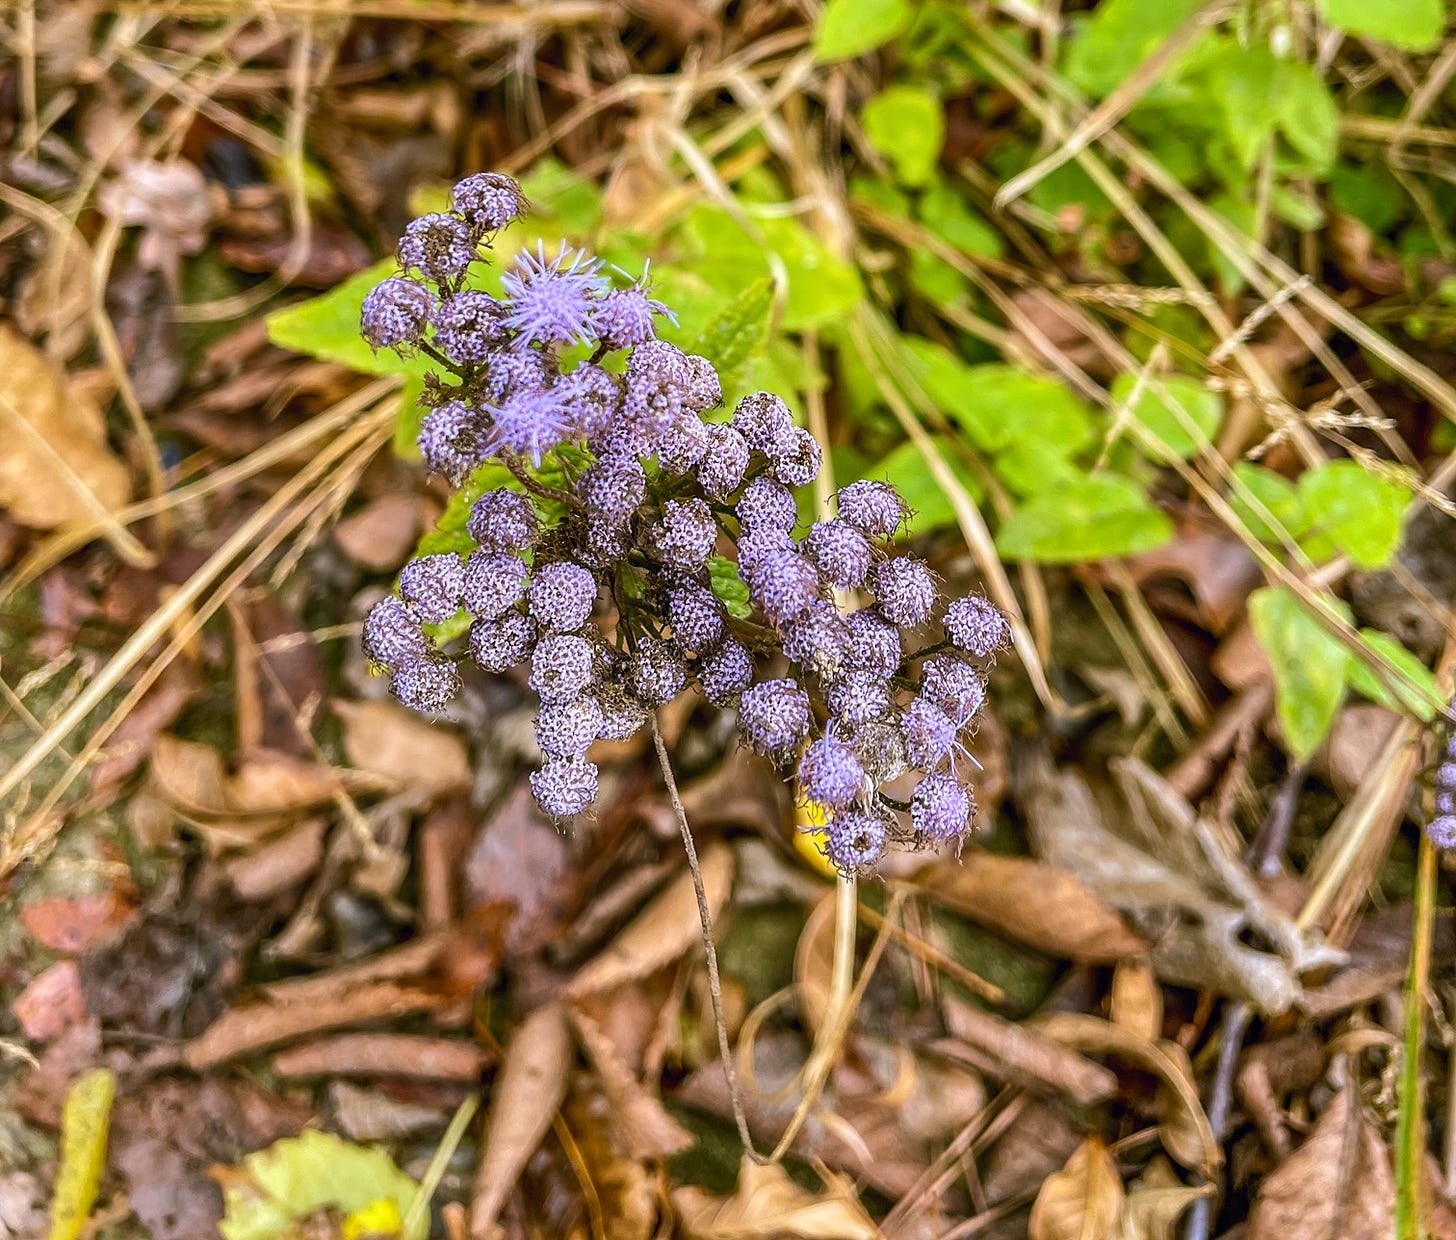 Picture of a small plant maybe a couple inches off the ground with a cluster of tiny blue flowers that are about to bloom